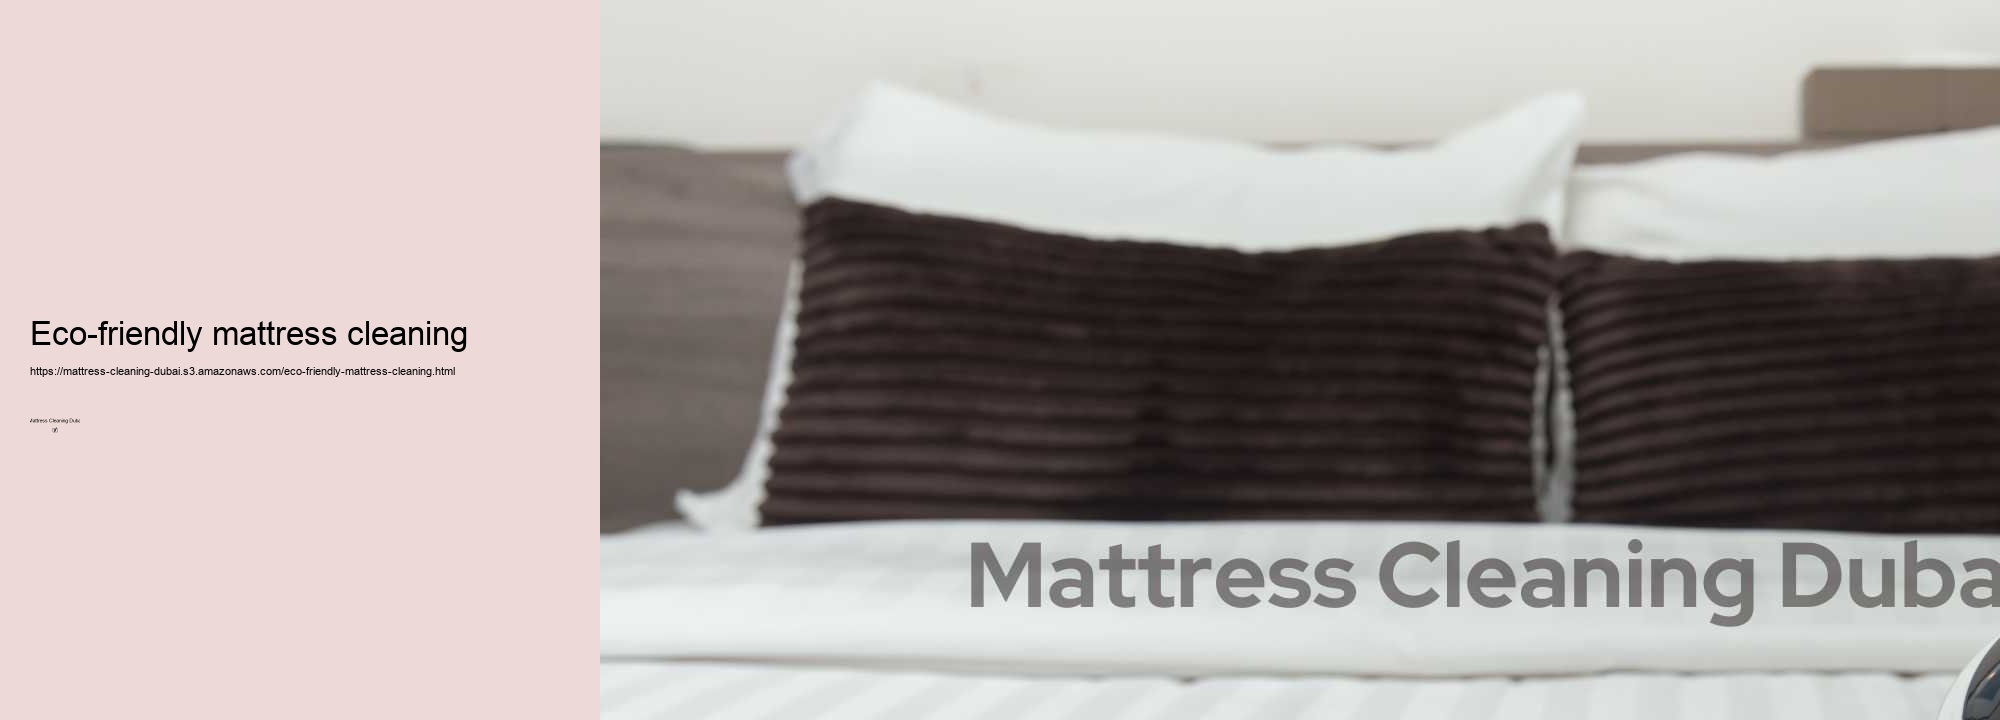 Eco-friendly mattress cleaning